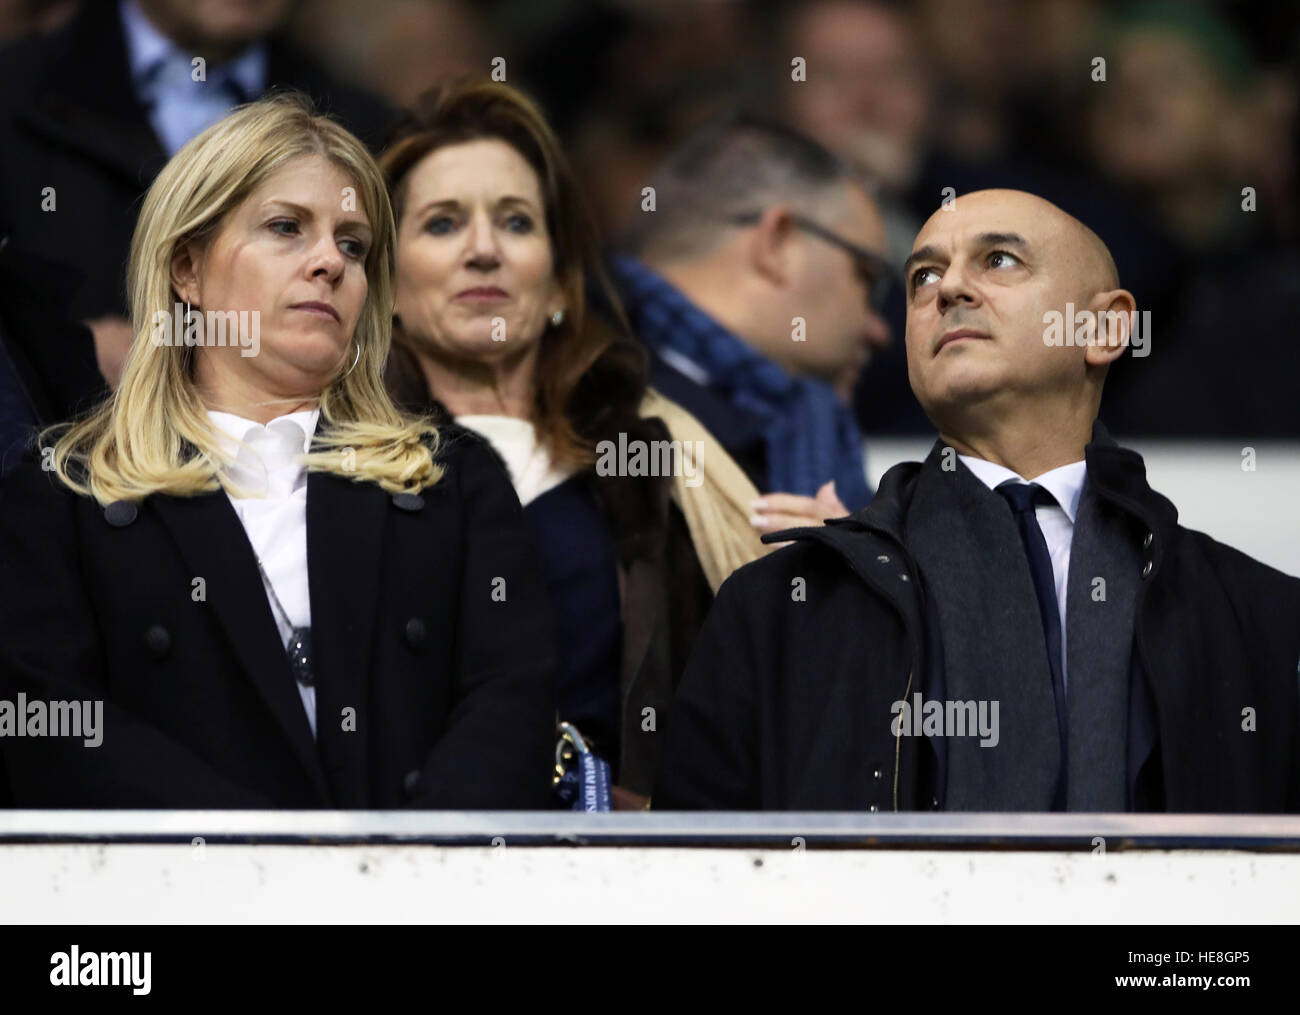 Tottenham Hotspur chairman Daniel Levy with his wife Tracey in the stands  during the Premier League match at White Hart Lane, London Stock Photo -  Alamy